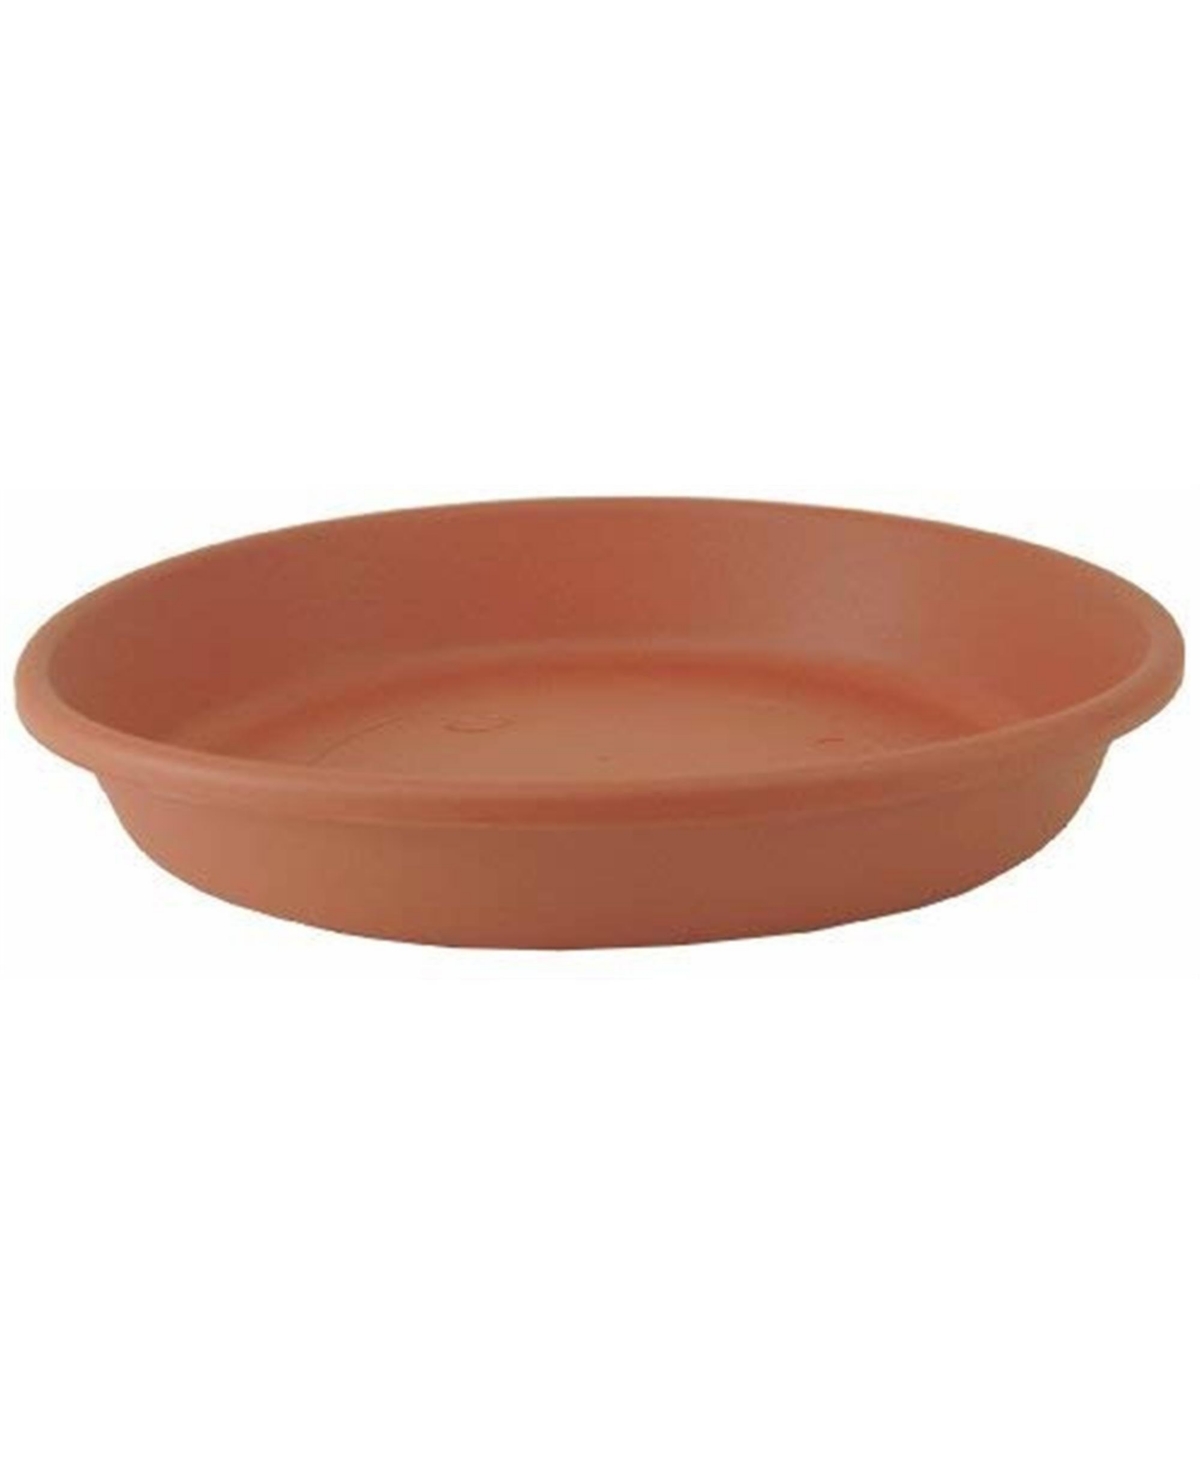 15227107 Akro Mils Classic Saucer for 16-Inch Classic Pot,  sku 15227107